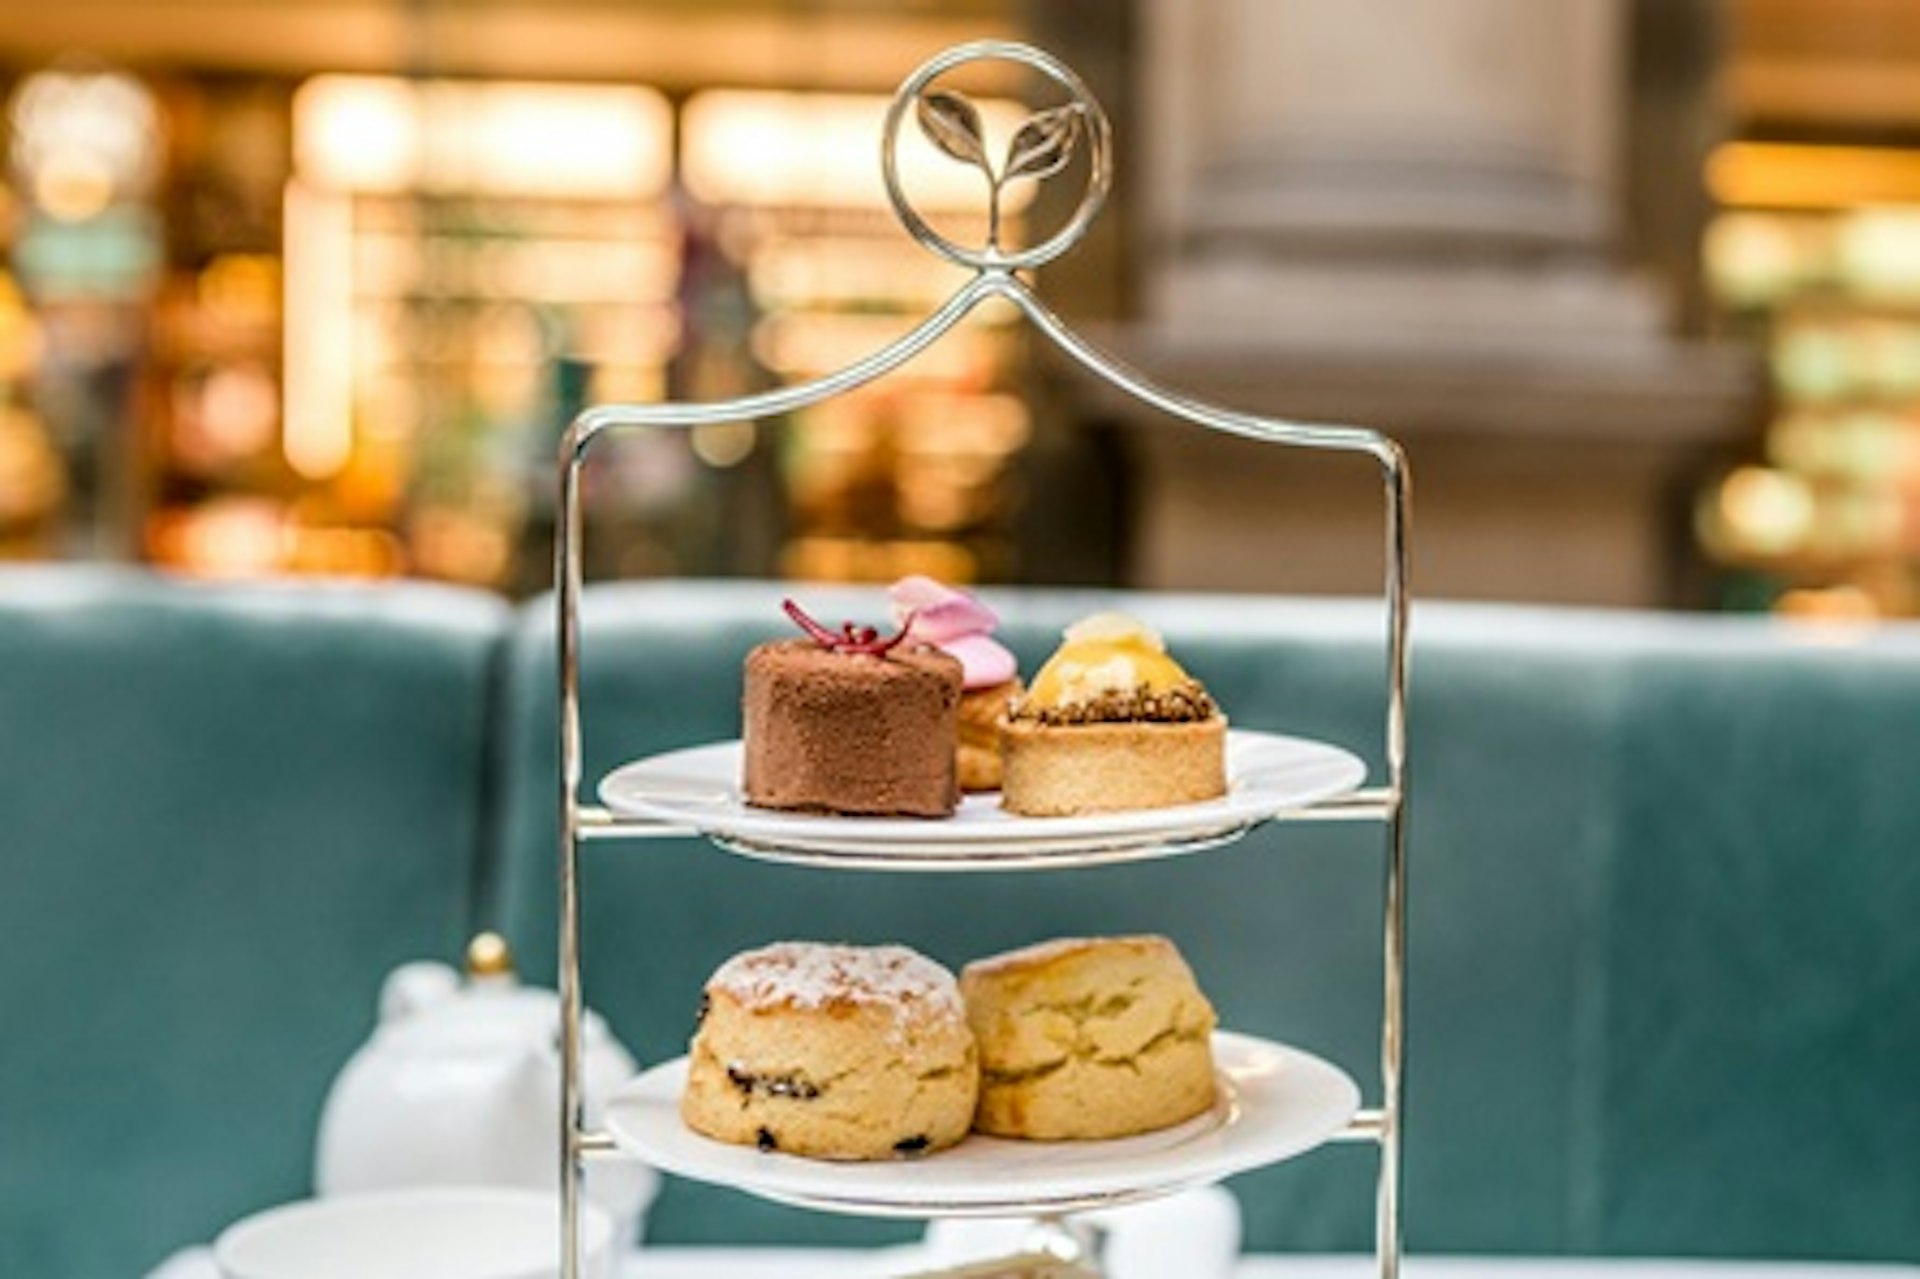 Champagne Afternoon Tea for Two at The Fortnum & Mason Bar and Restaurant at Royal Exchange 1